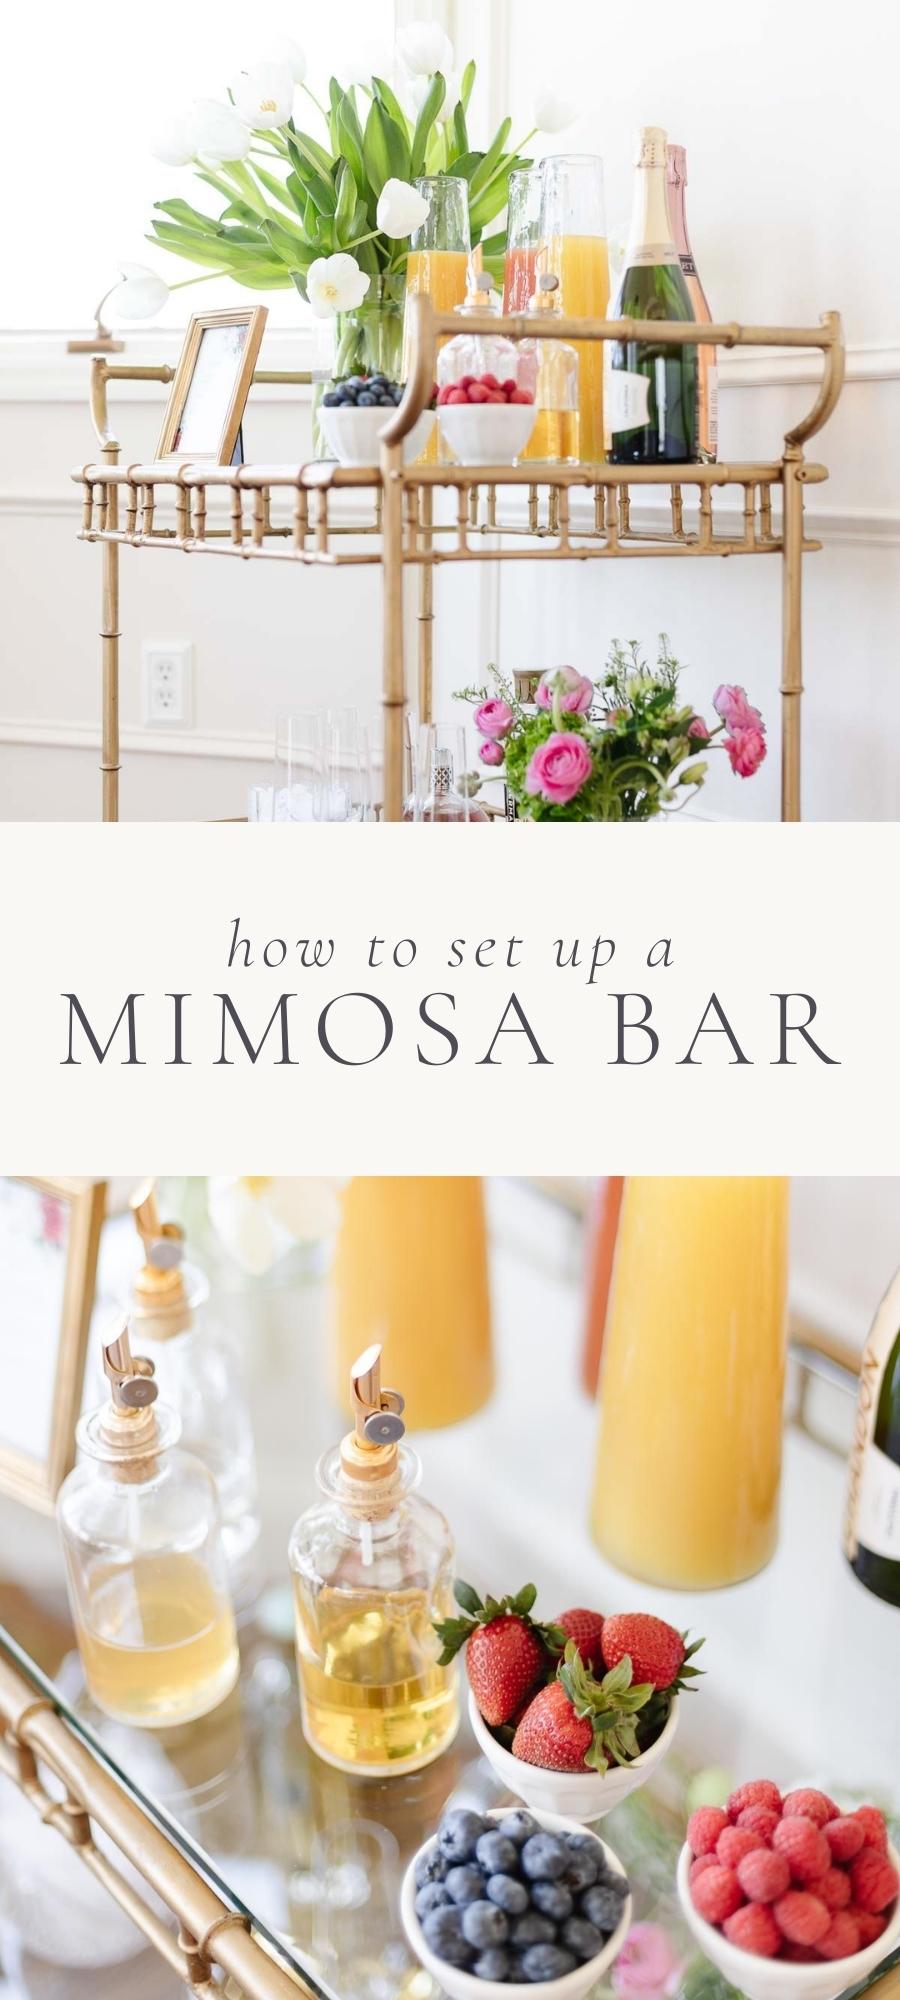 mimosa bar with drinks fruits in bowls flower plants champage and glasses